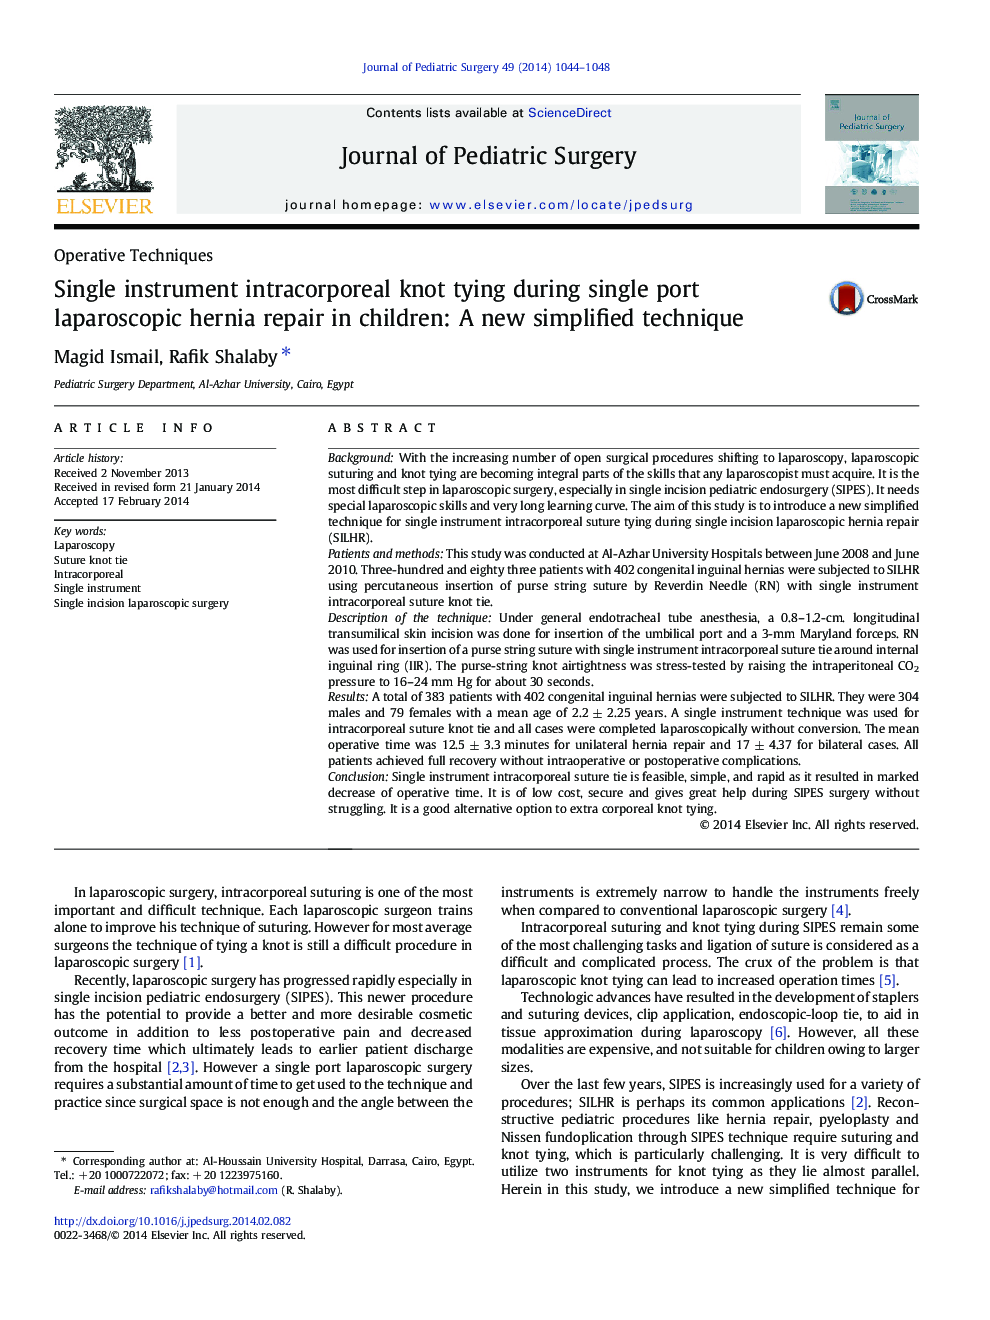 Single instrument intracorporeal knot tying during single port laparoscopic hernia repair in children: A new simplified technique